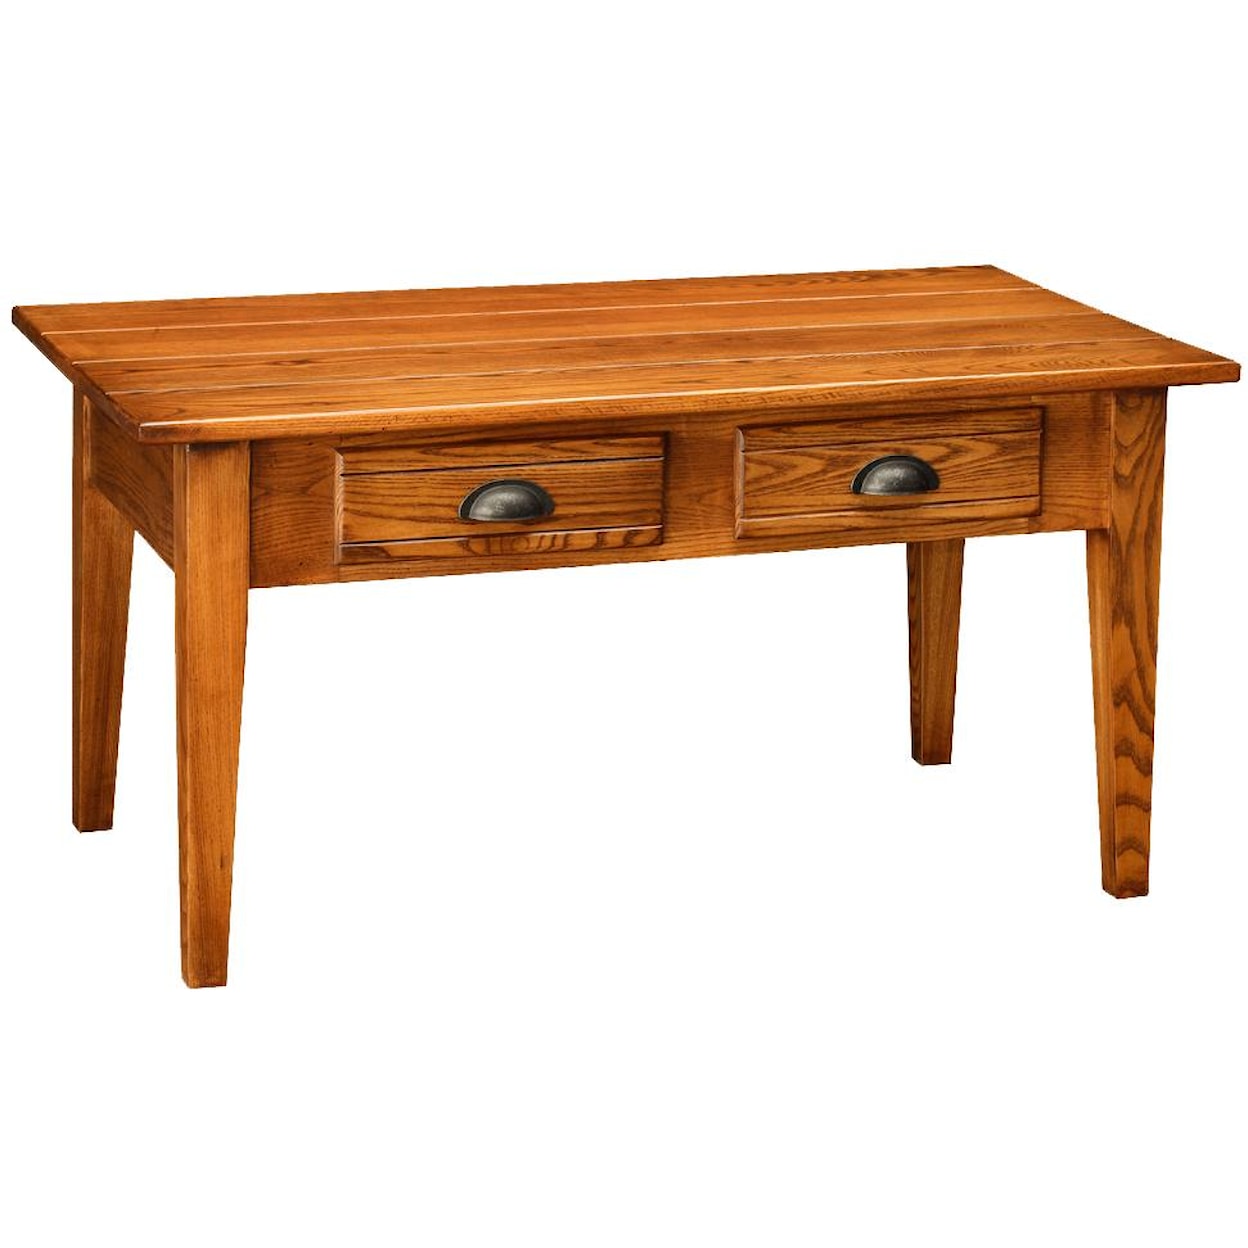 Leick Furniture Favorite Finds 2 Drawer Coffee Table